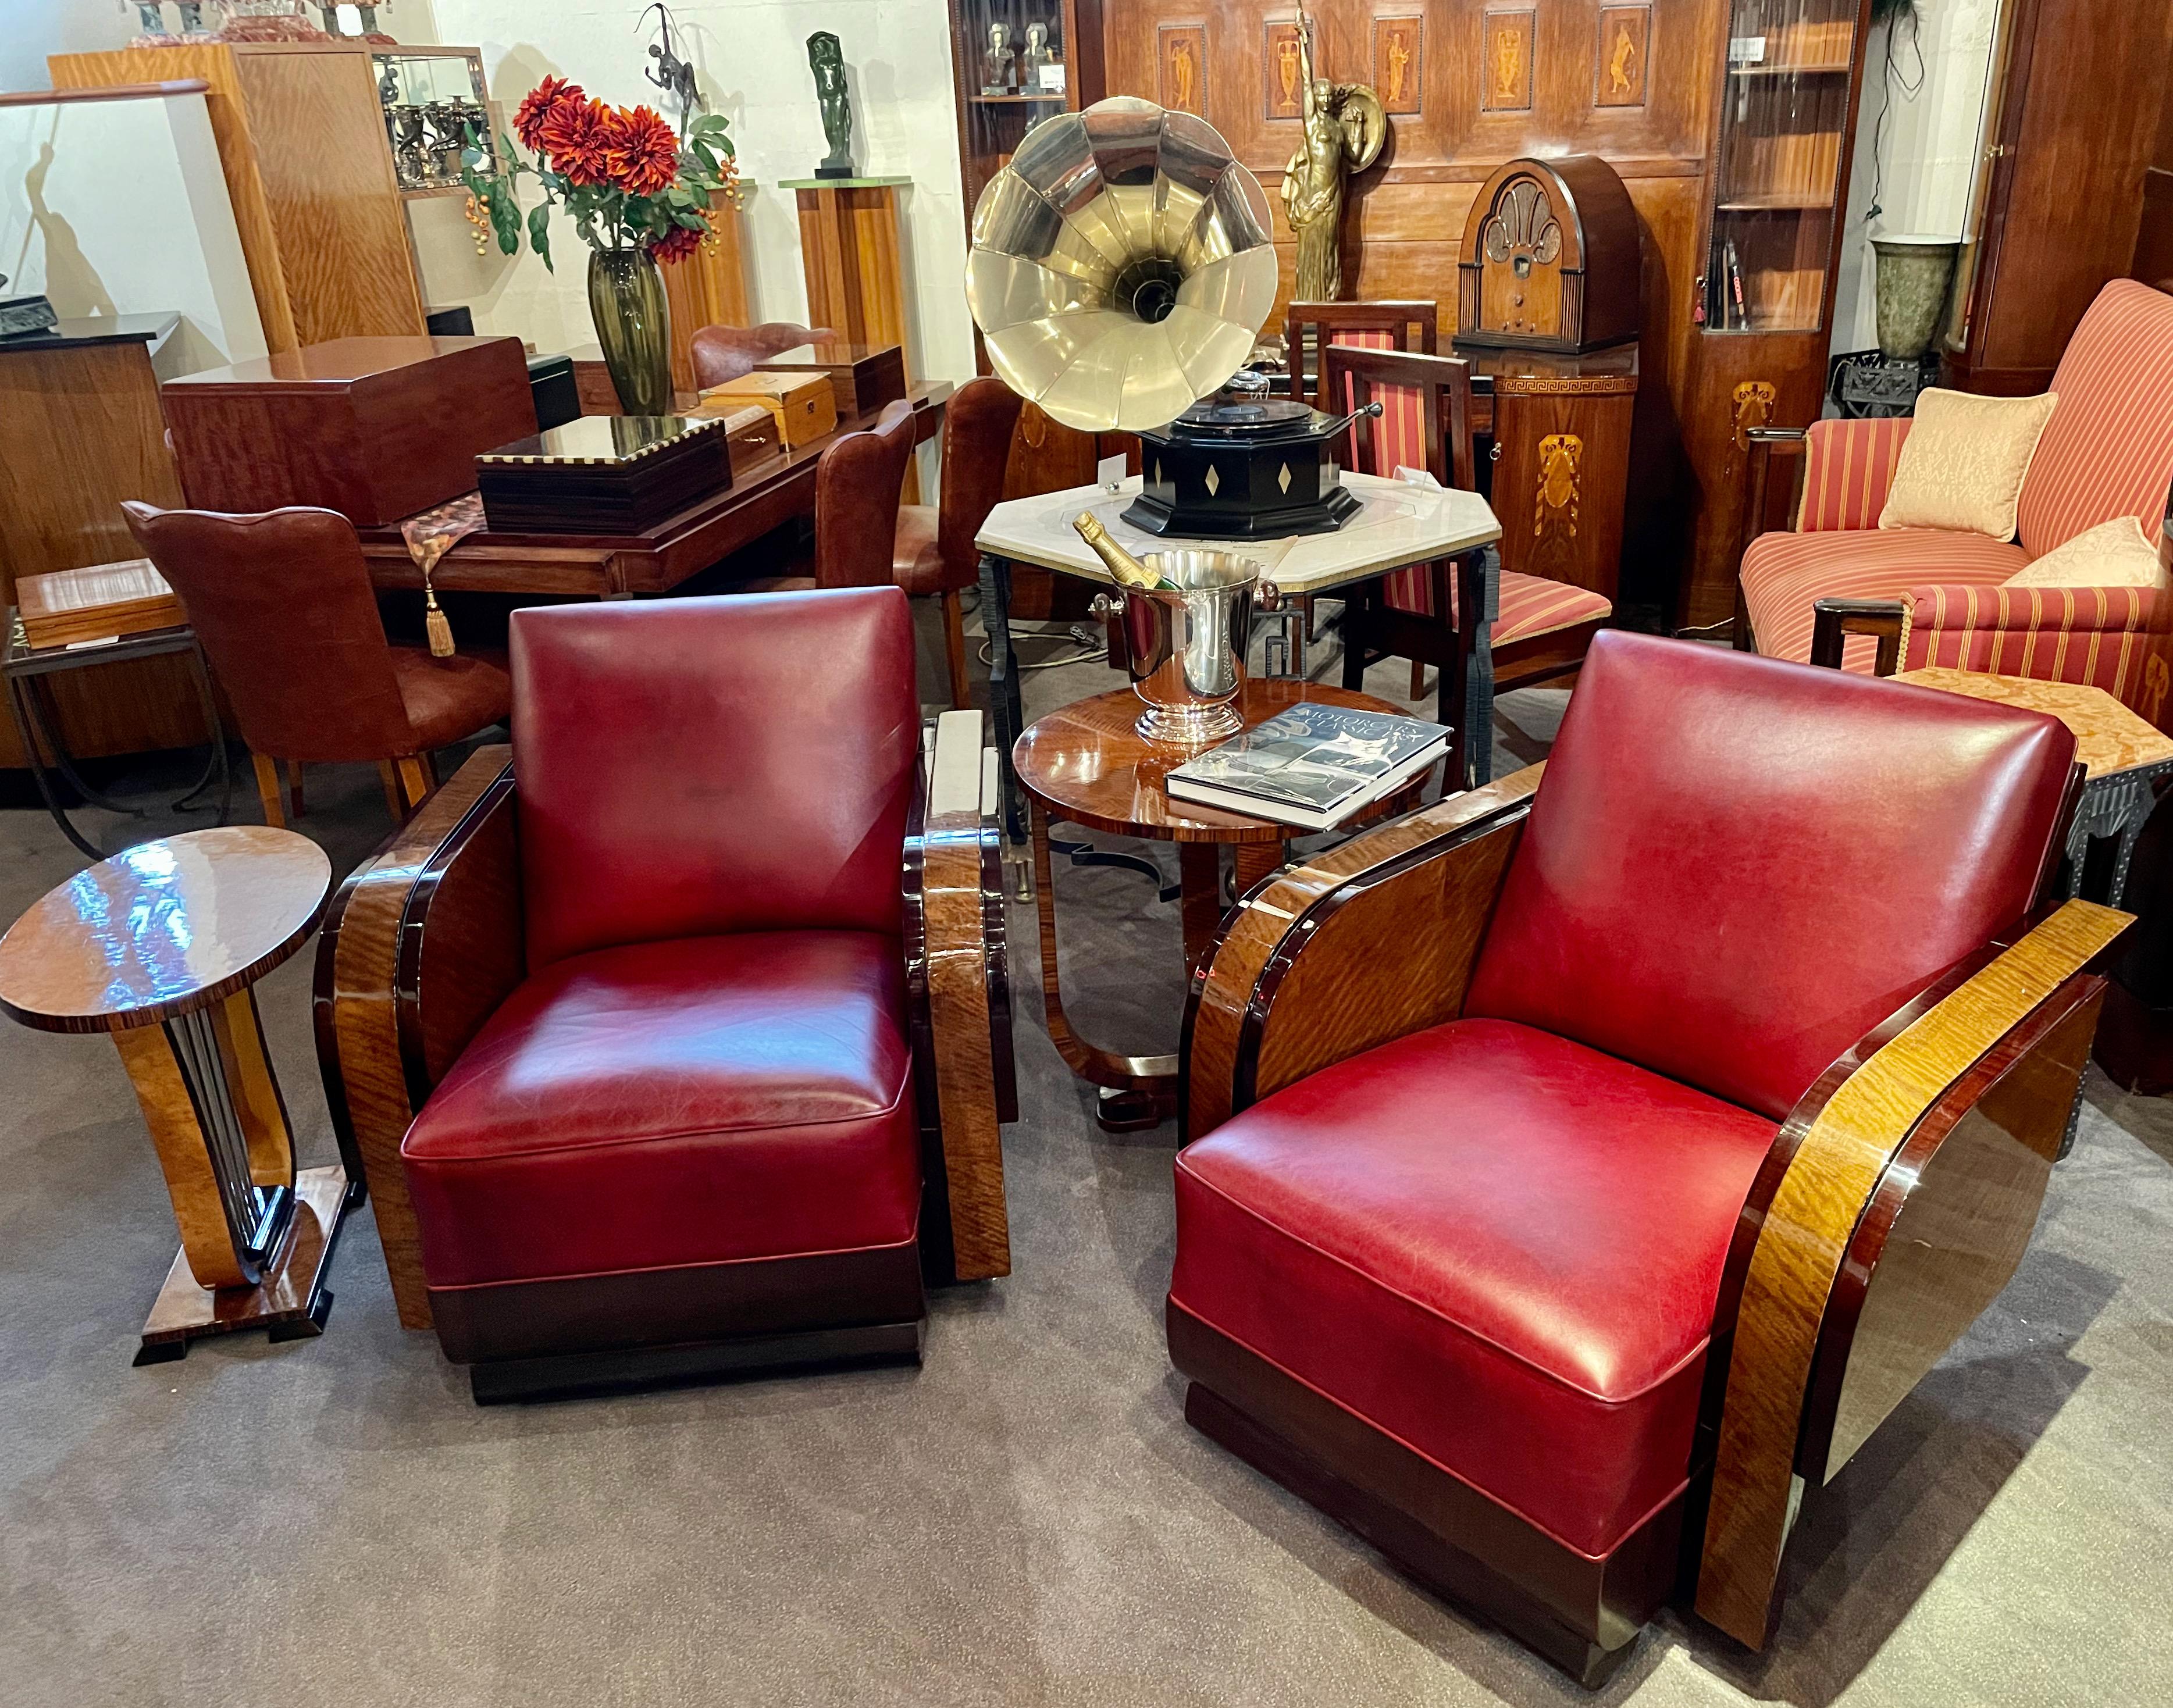 Modernist French wood and leather club chairs. Quality multi-layered wood details rarely seen in French club chairs. The rounded arms with stepped design, both unique inside and outside. Solid wood back, and rounded base showing unusual rounded foot